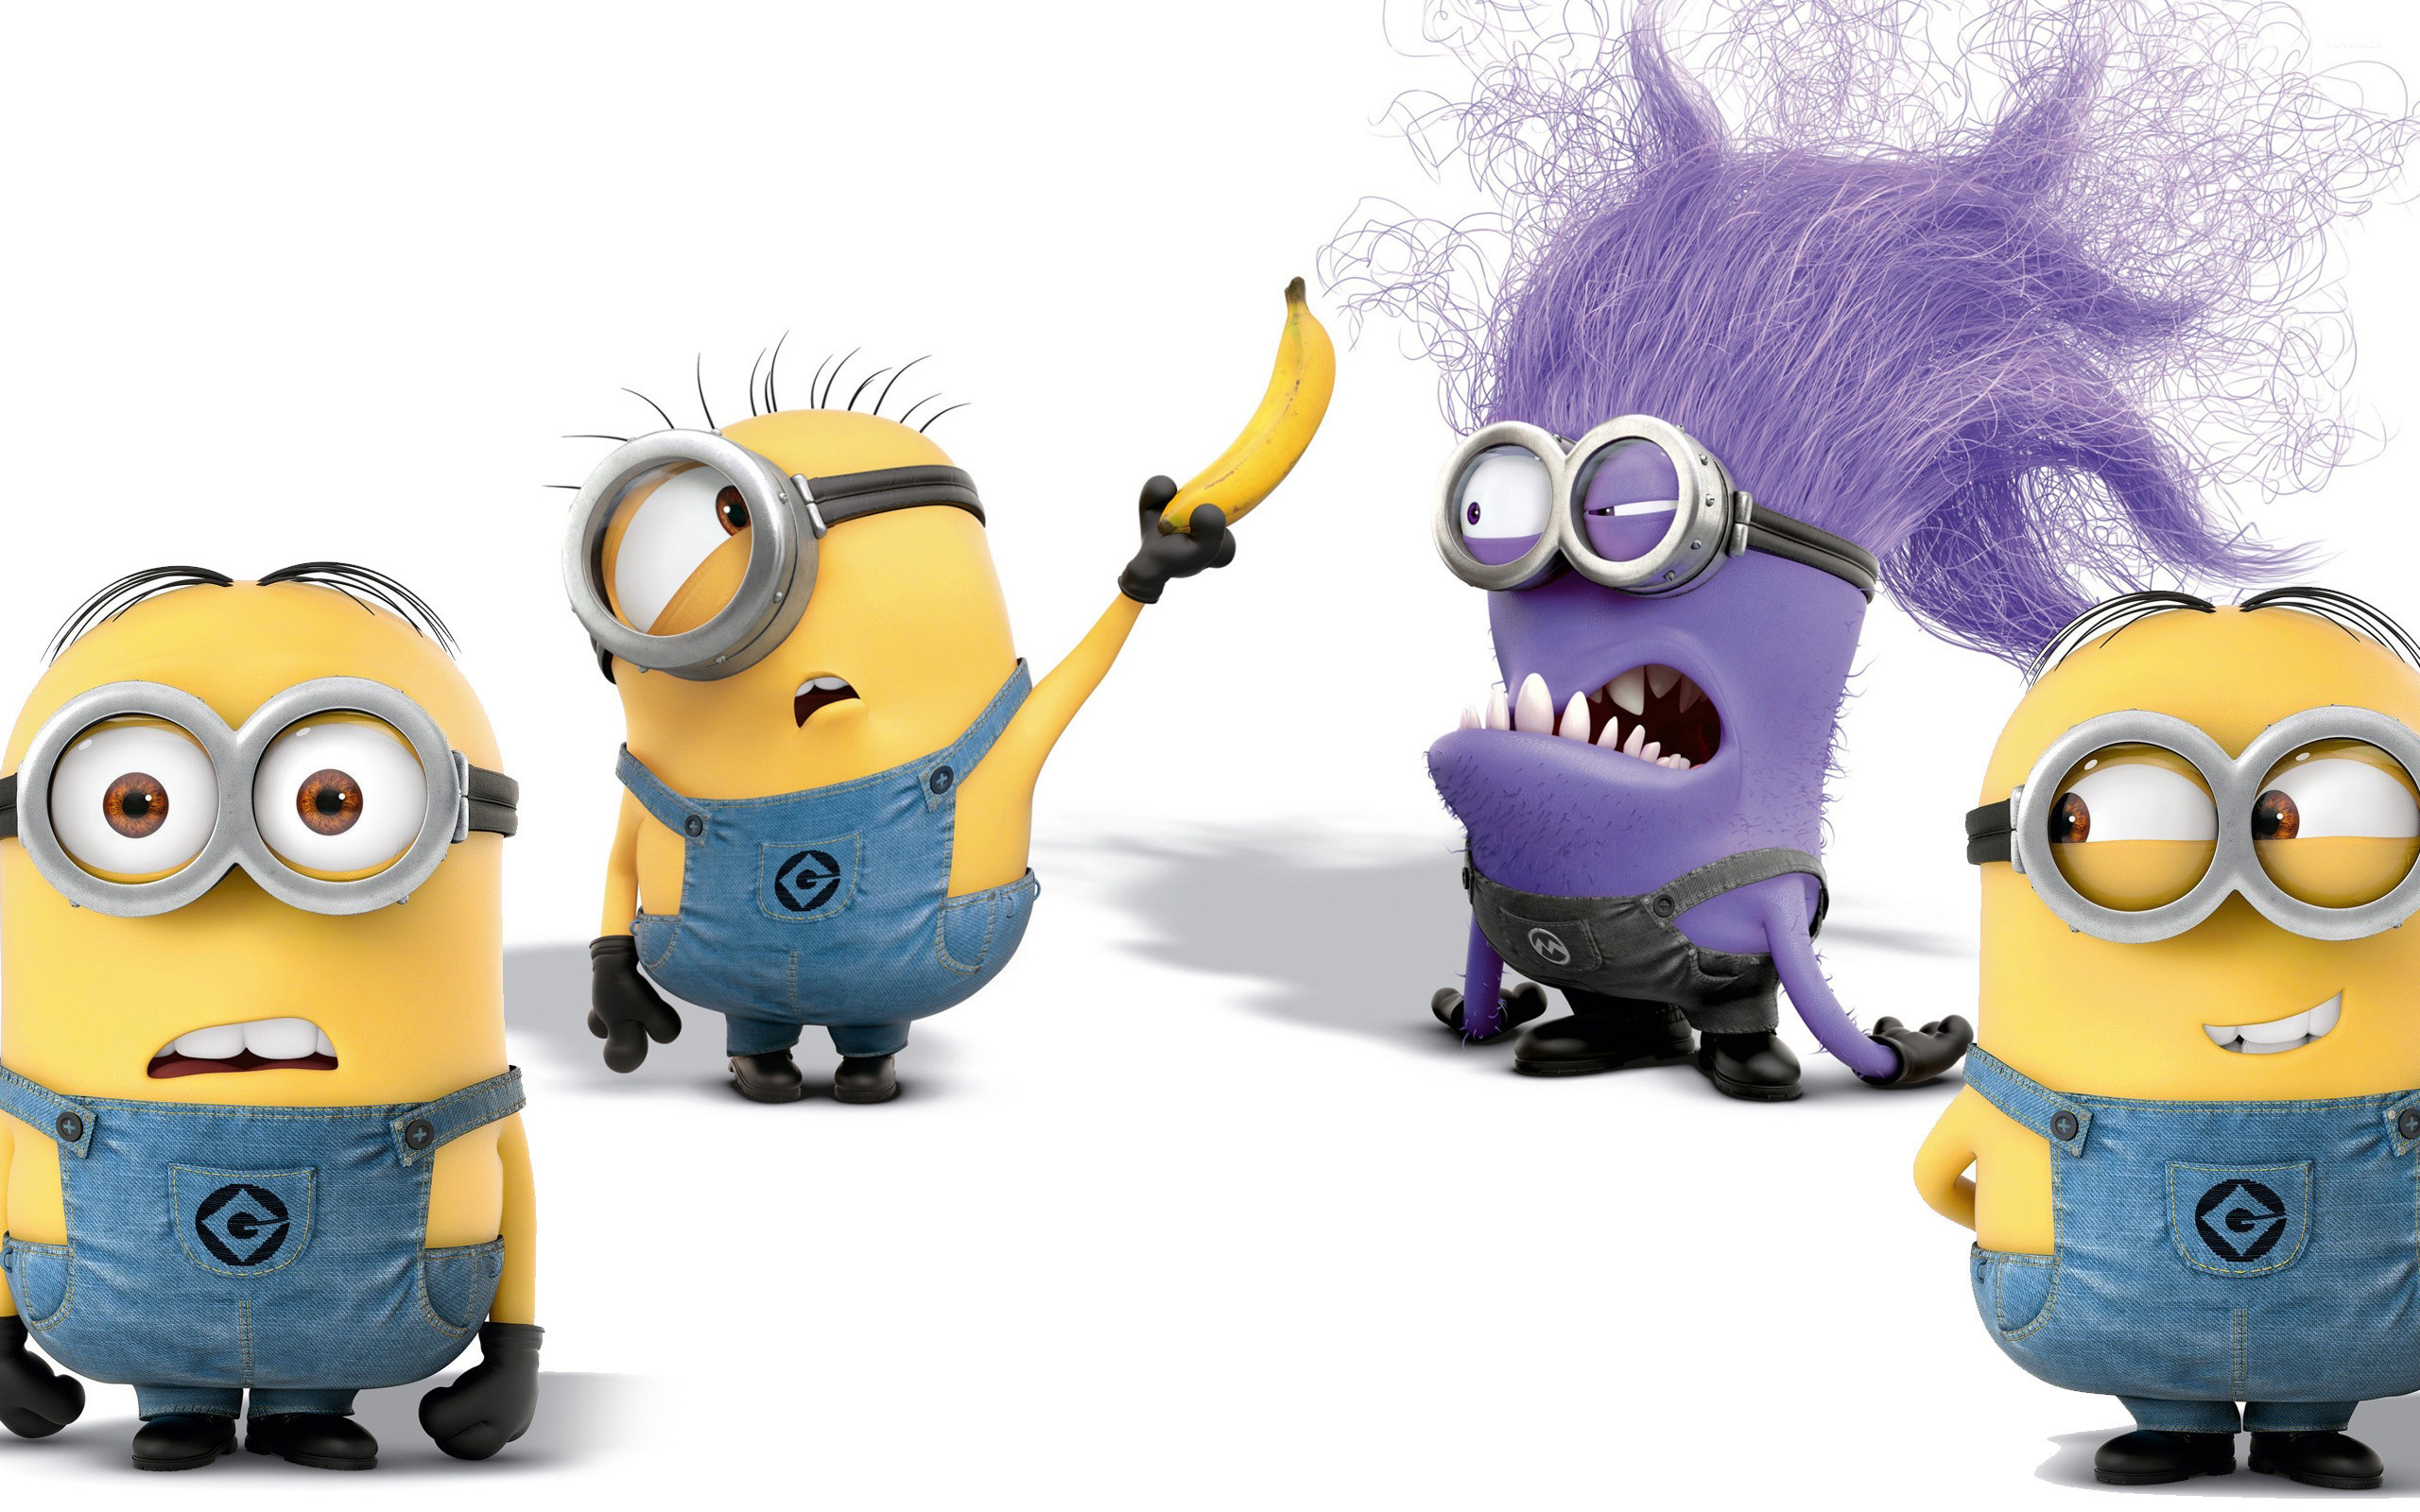 2560x1600 Minion Screensaver Images & Pictures - Becuo